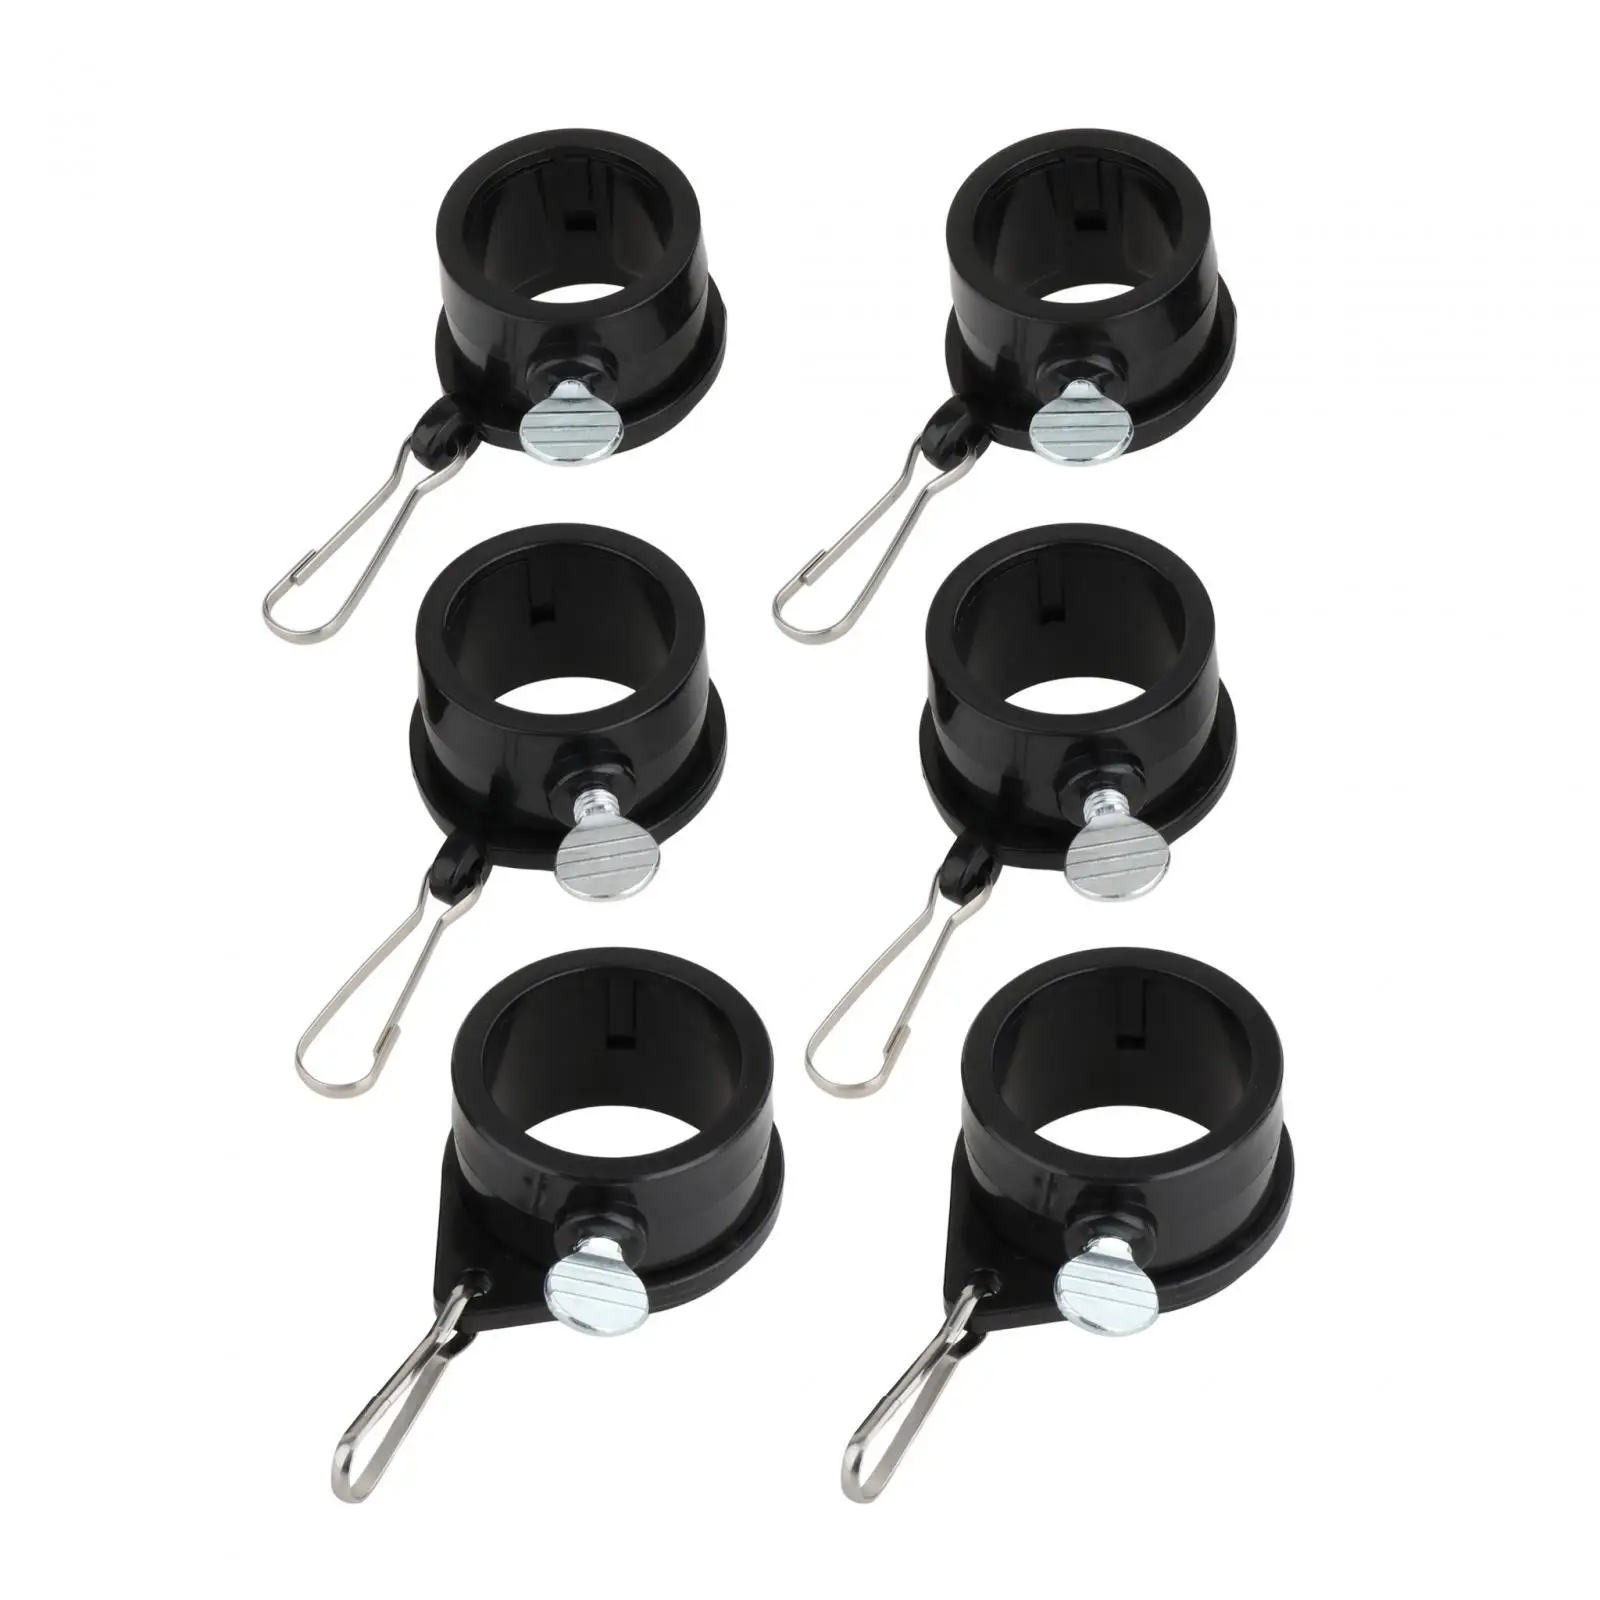 2x Tangles Free Flag Pole Clips Replacement Anti Wrap Flagpole Holder Rings